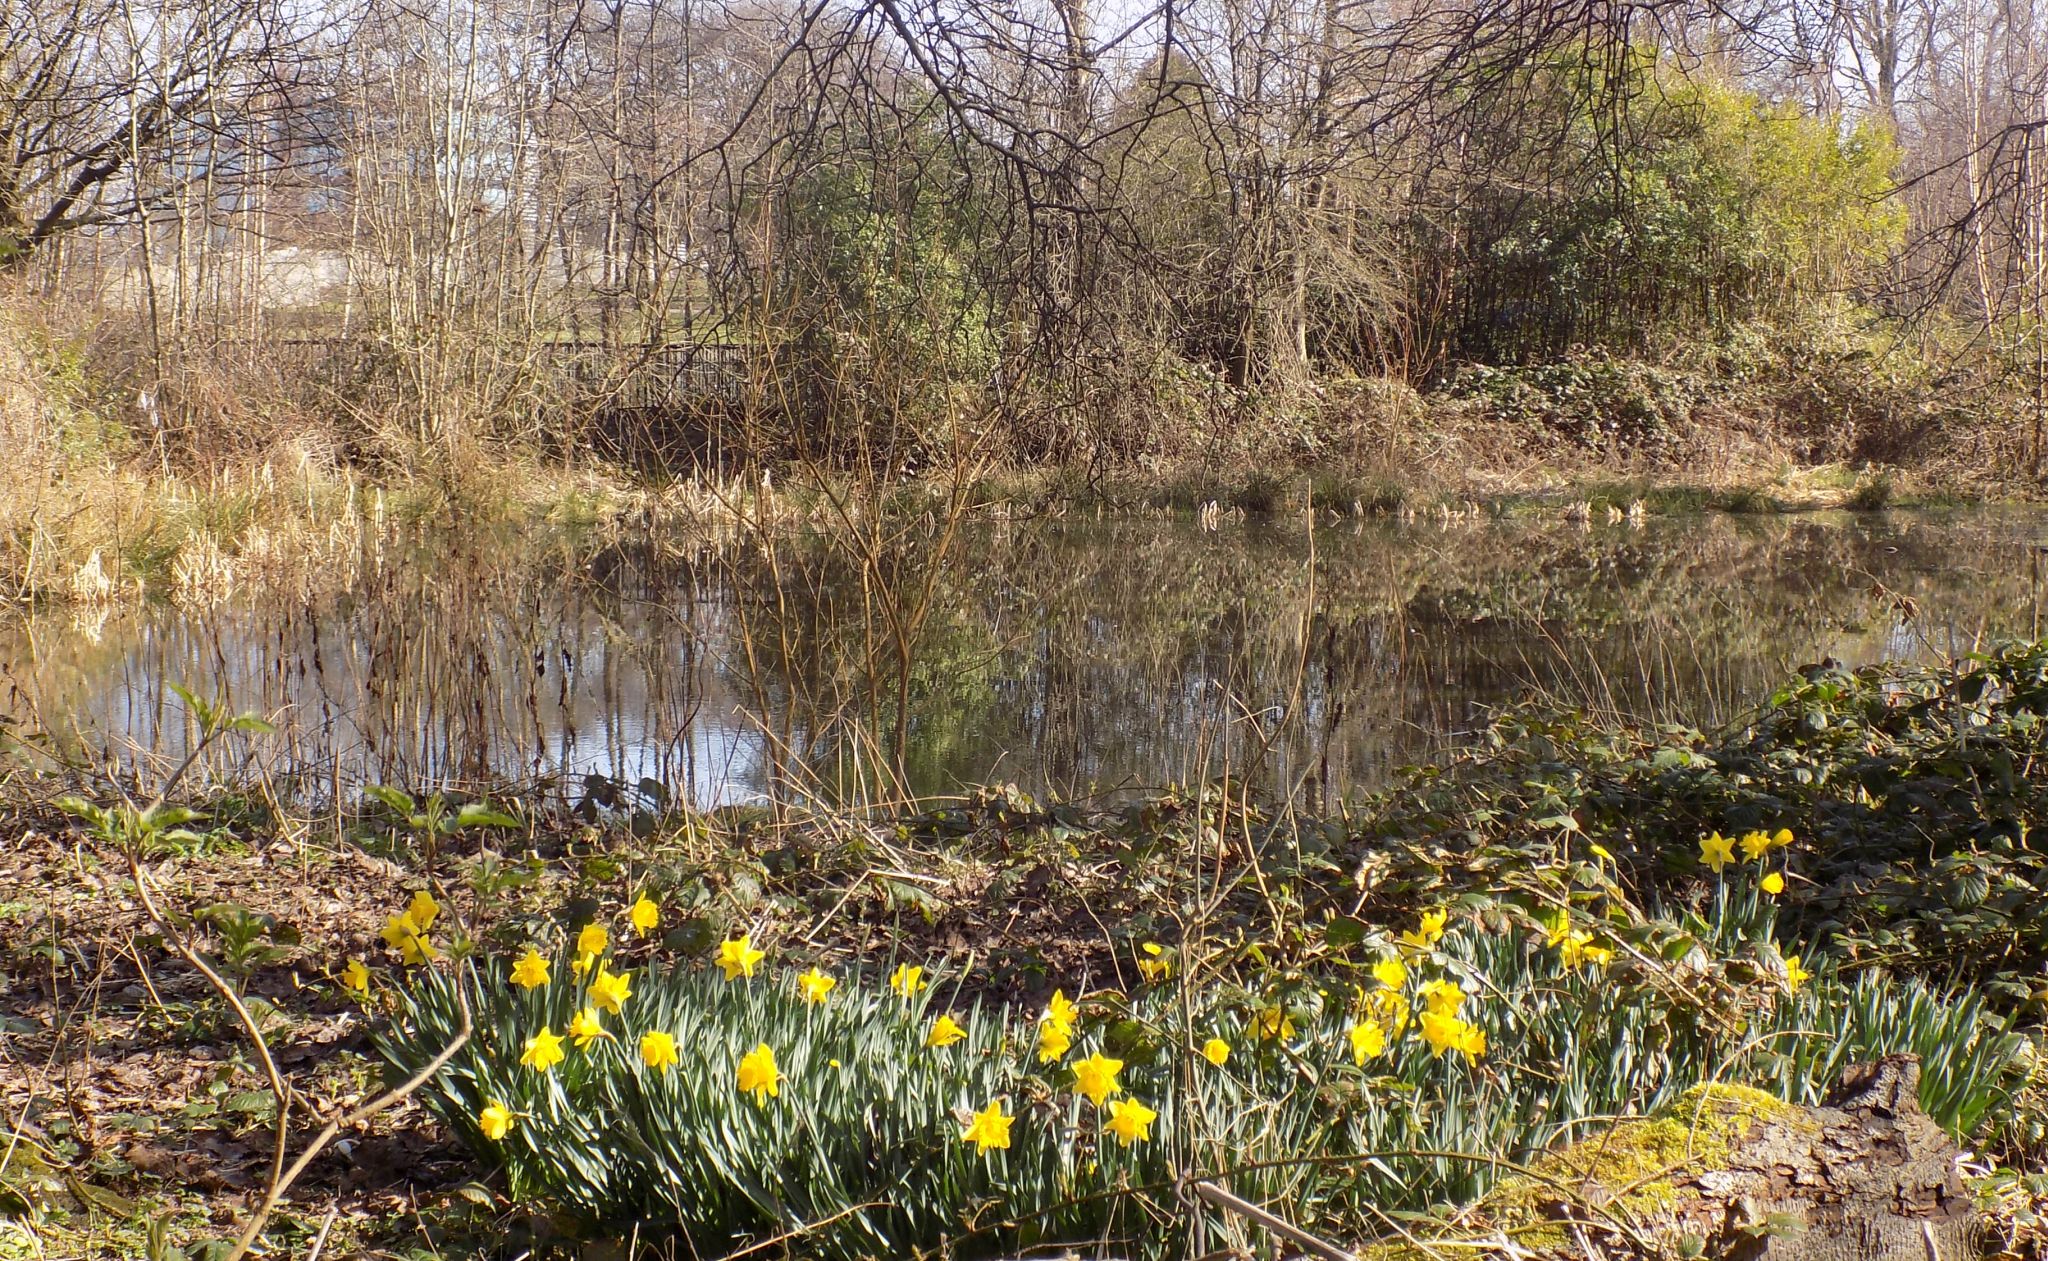 Daffodils at springtime in Richmond Park